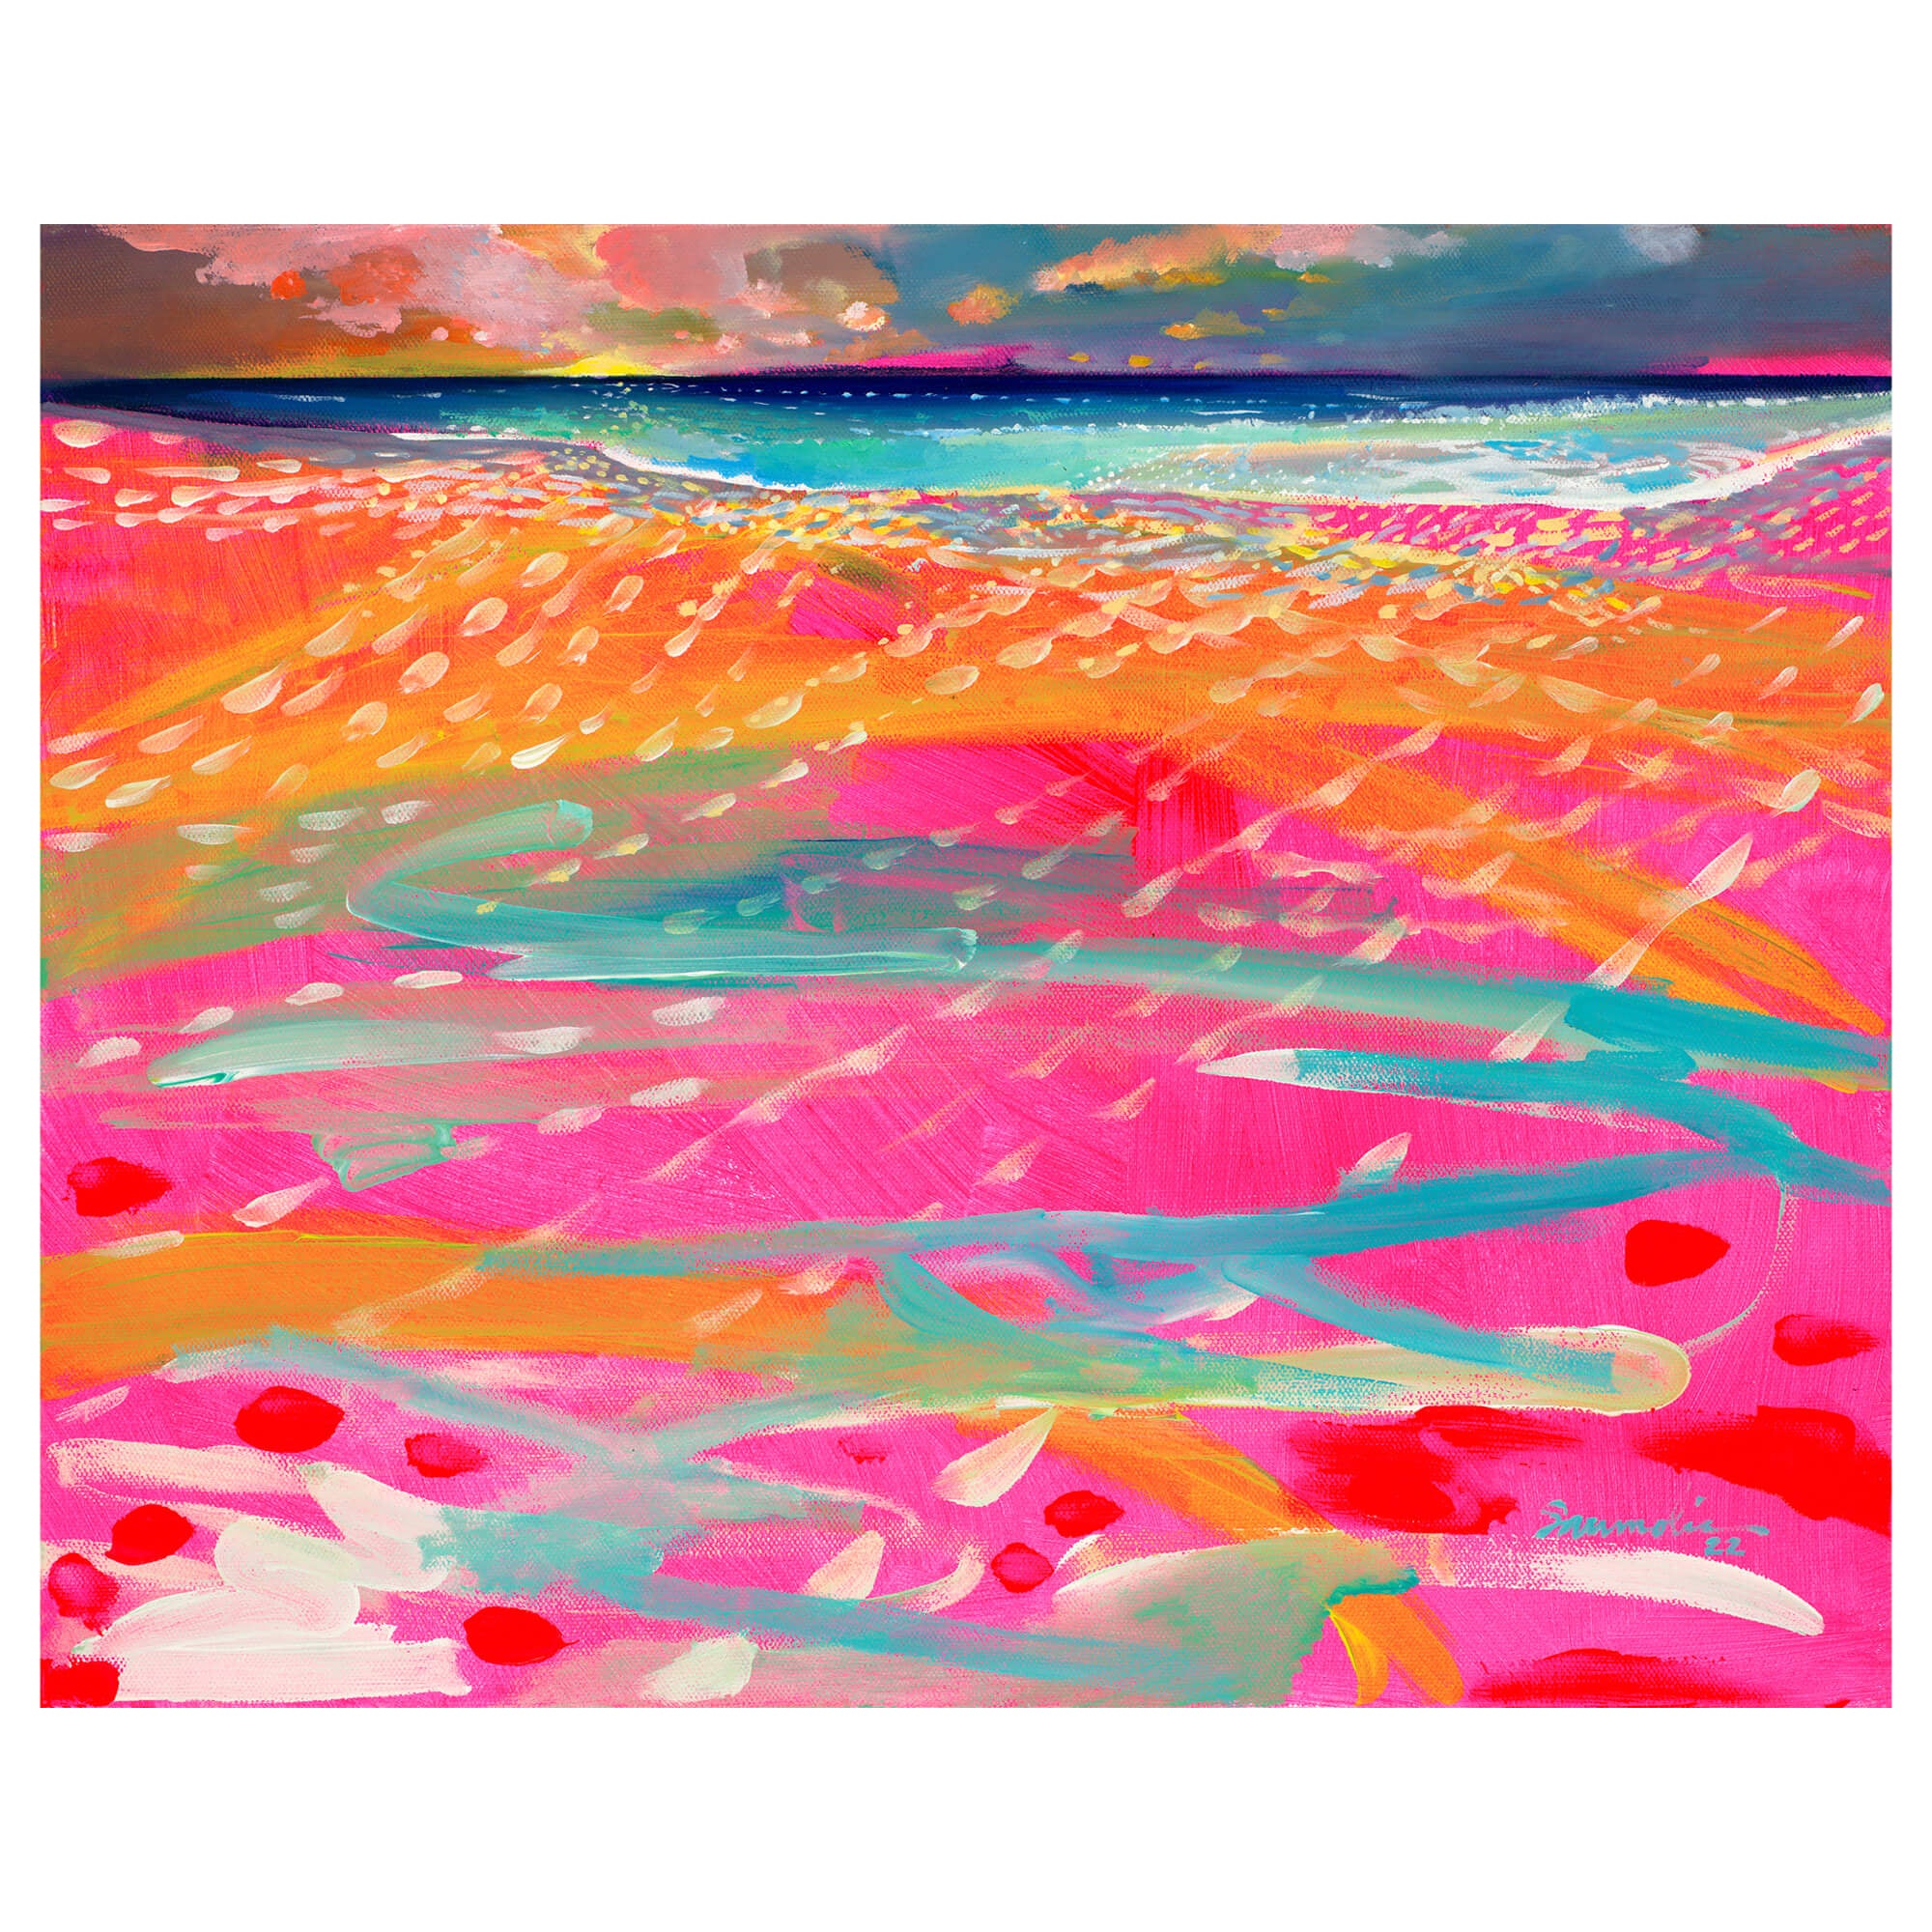 A matted art print featuring this beautiful vibrant neon-colored seascape by popular Hawaii artist Saumolia Puapuaga